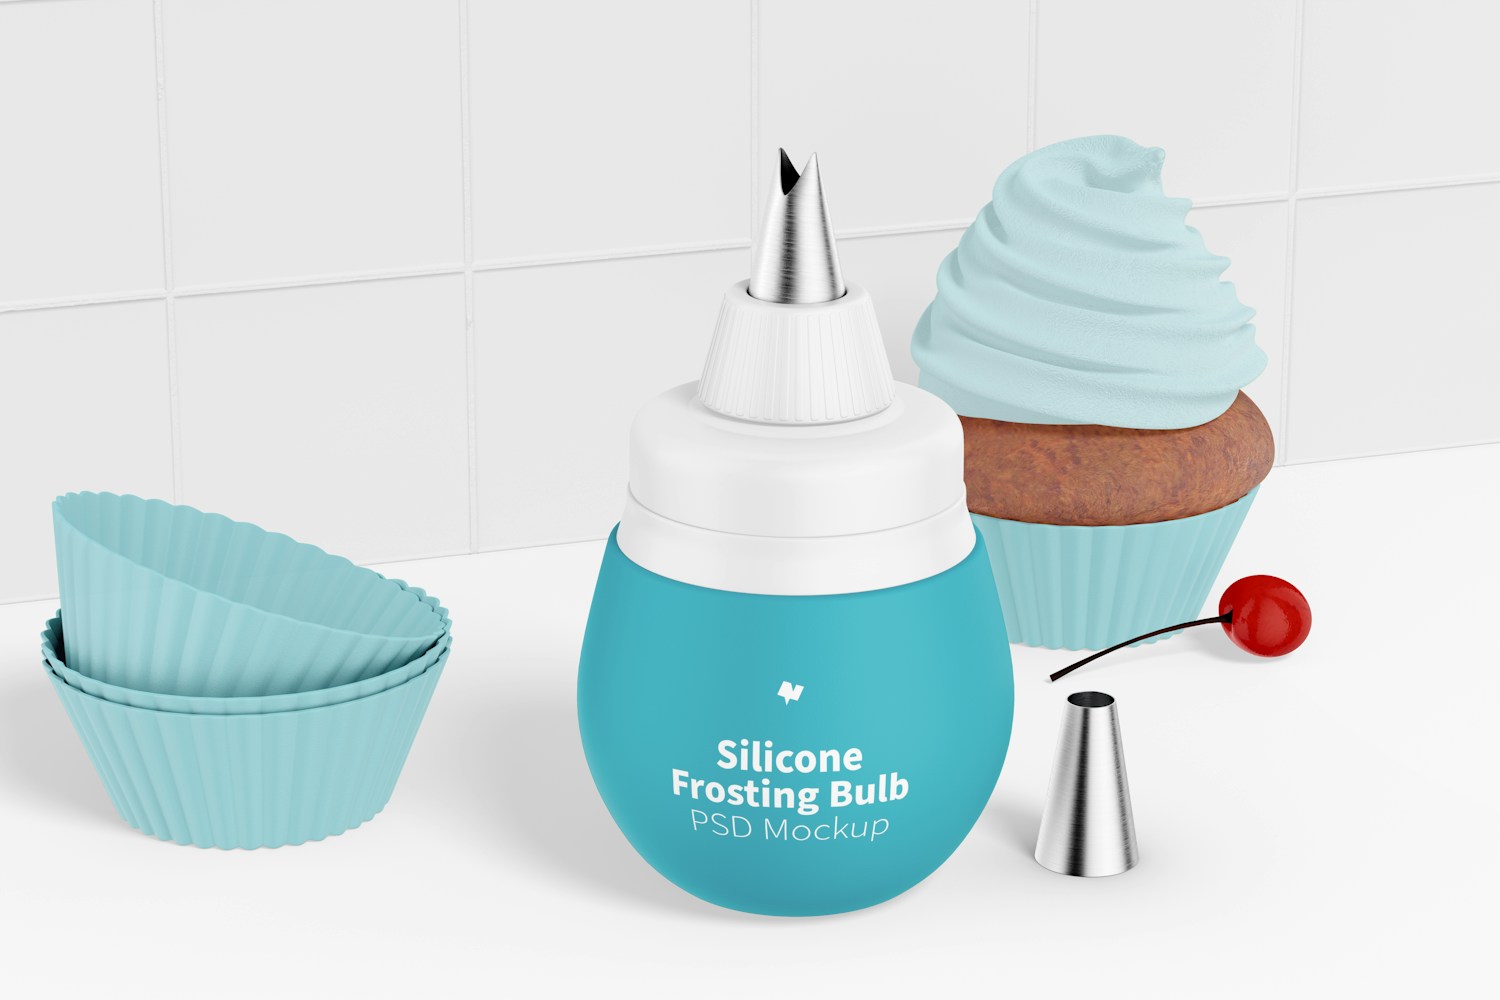 Silicone Frosting Bulb Mockup